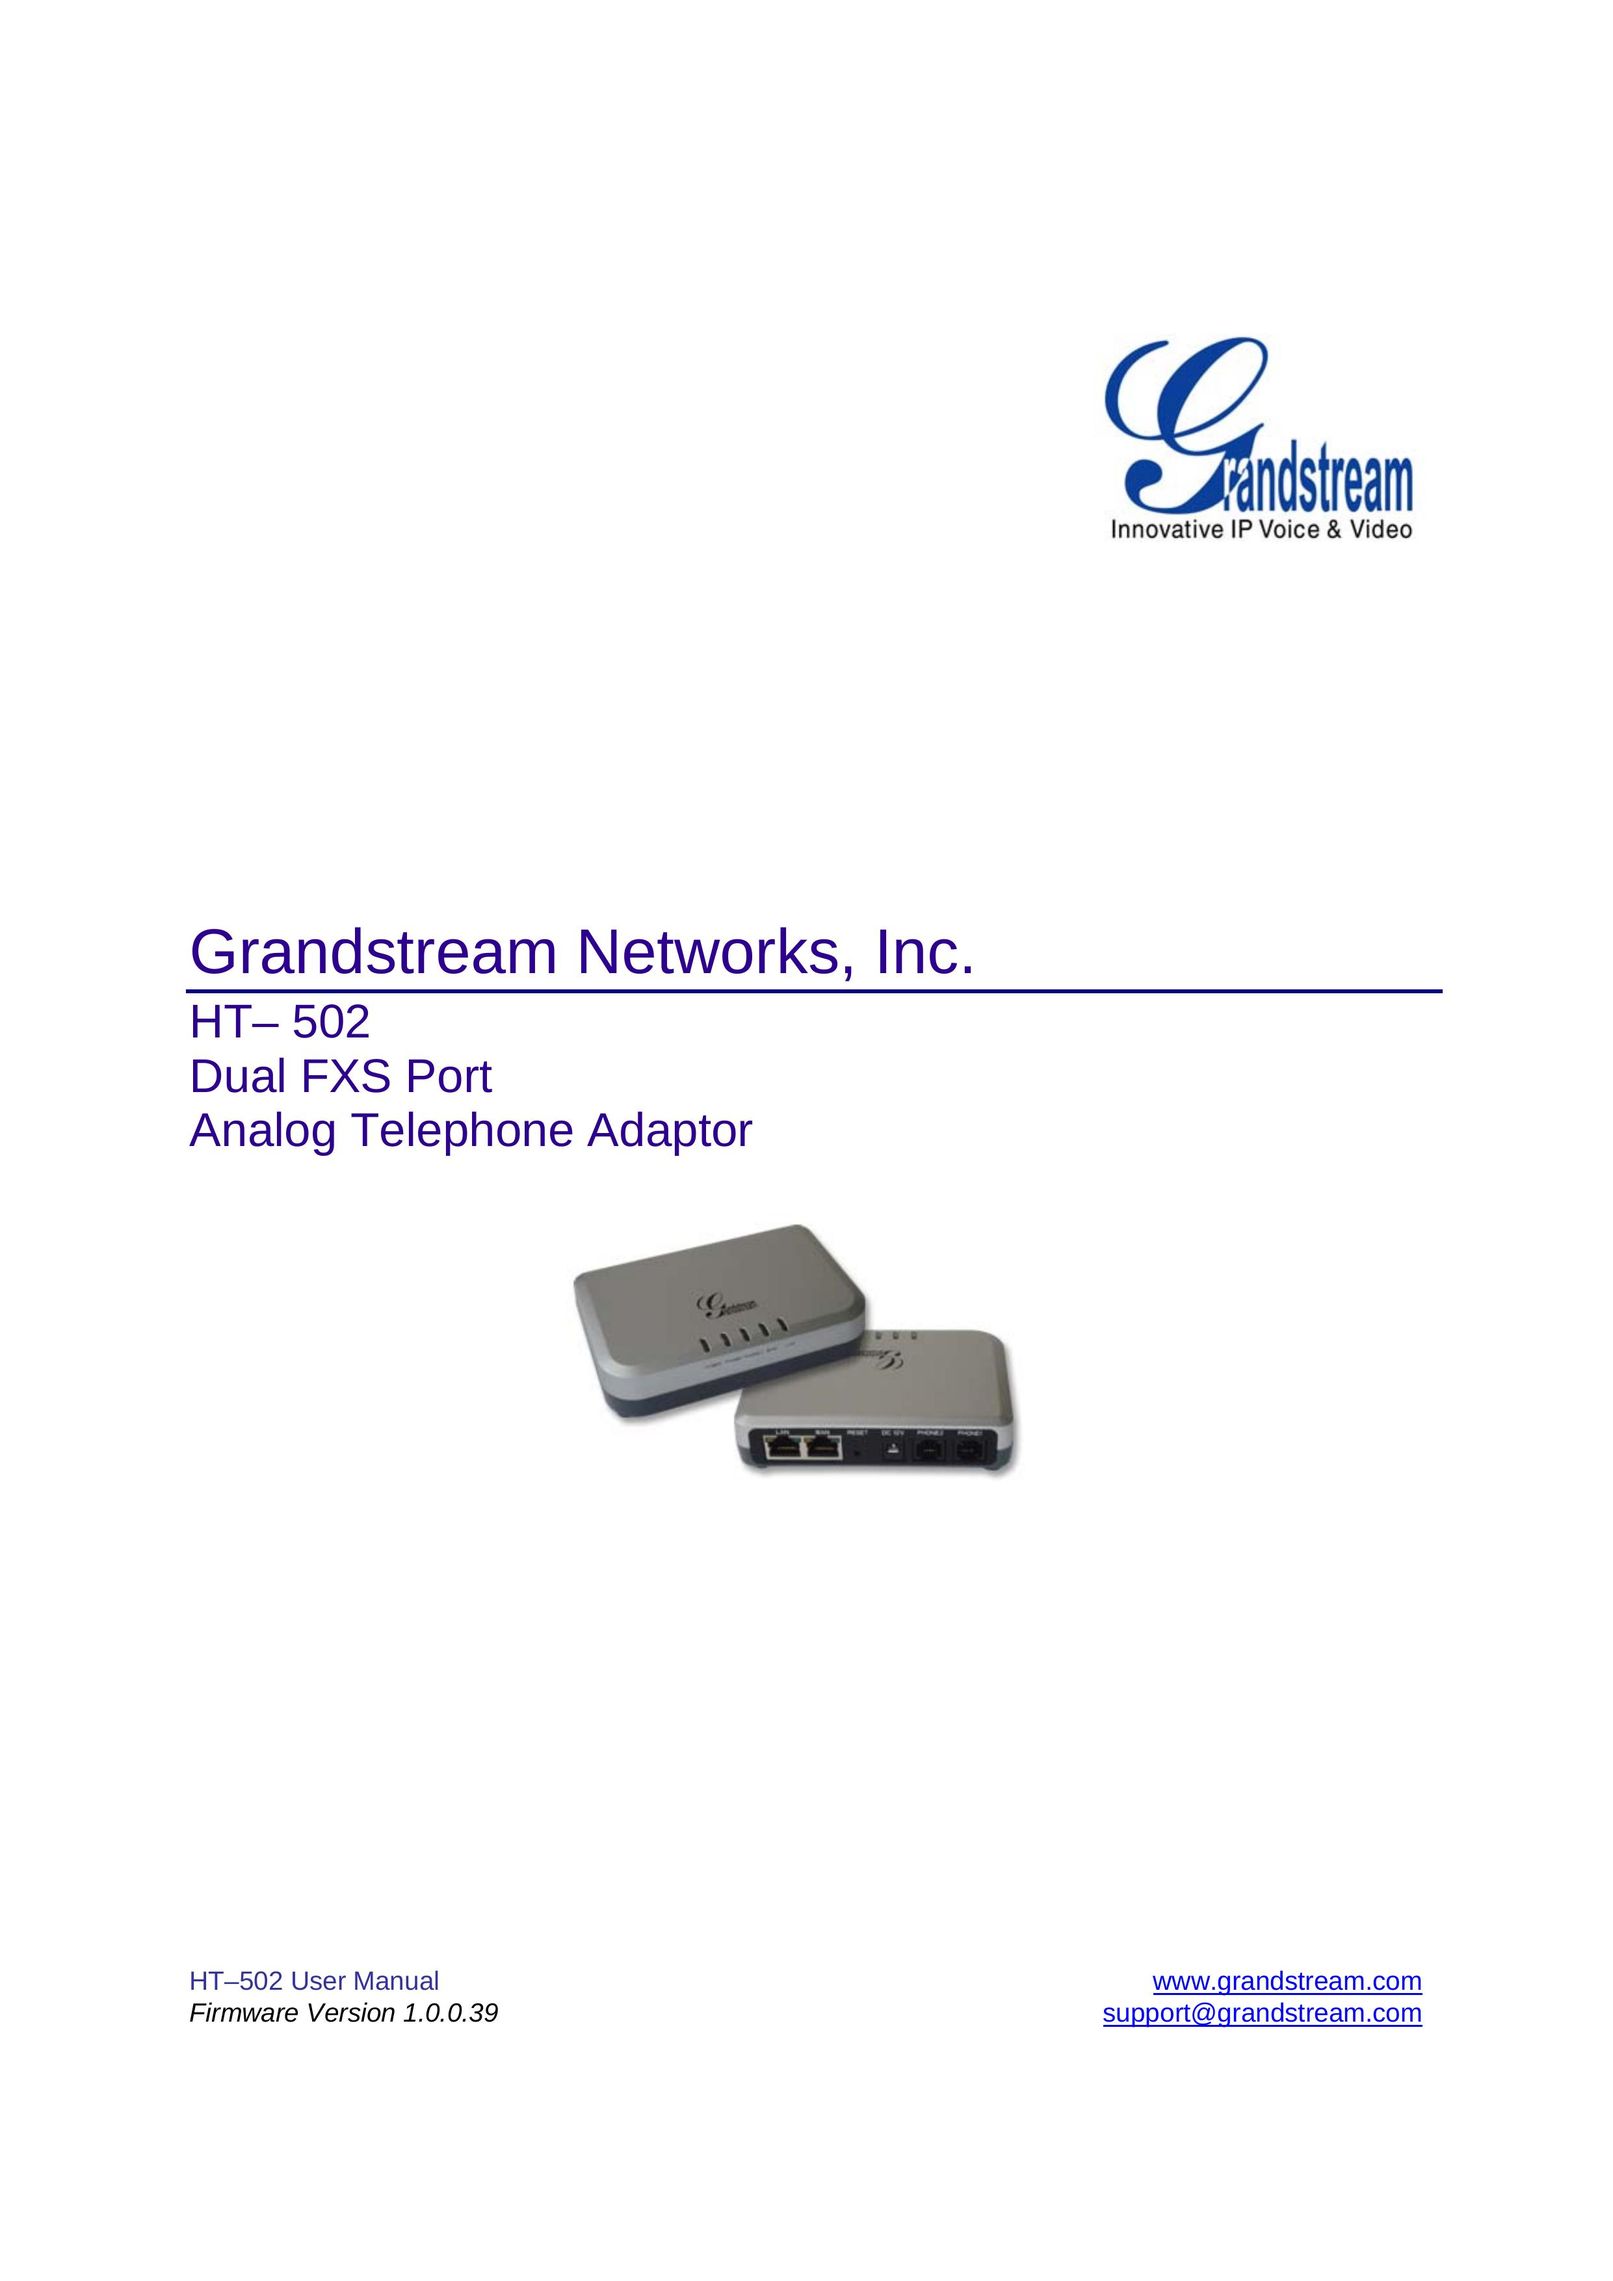 Grandstream Networks HT-502 Telephone Accessories User Manual